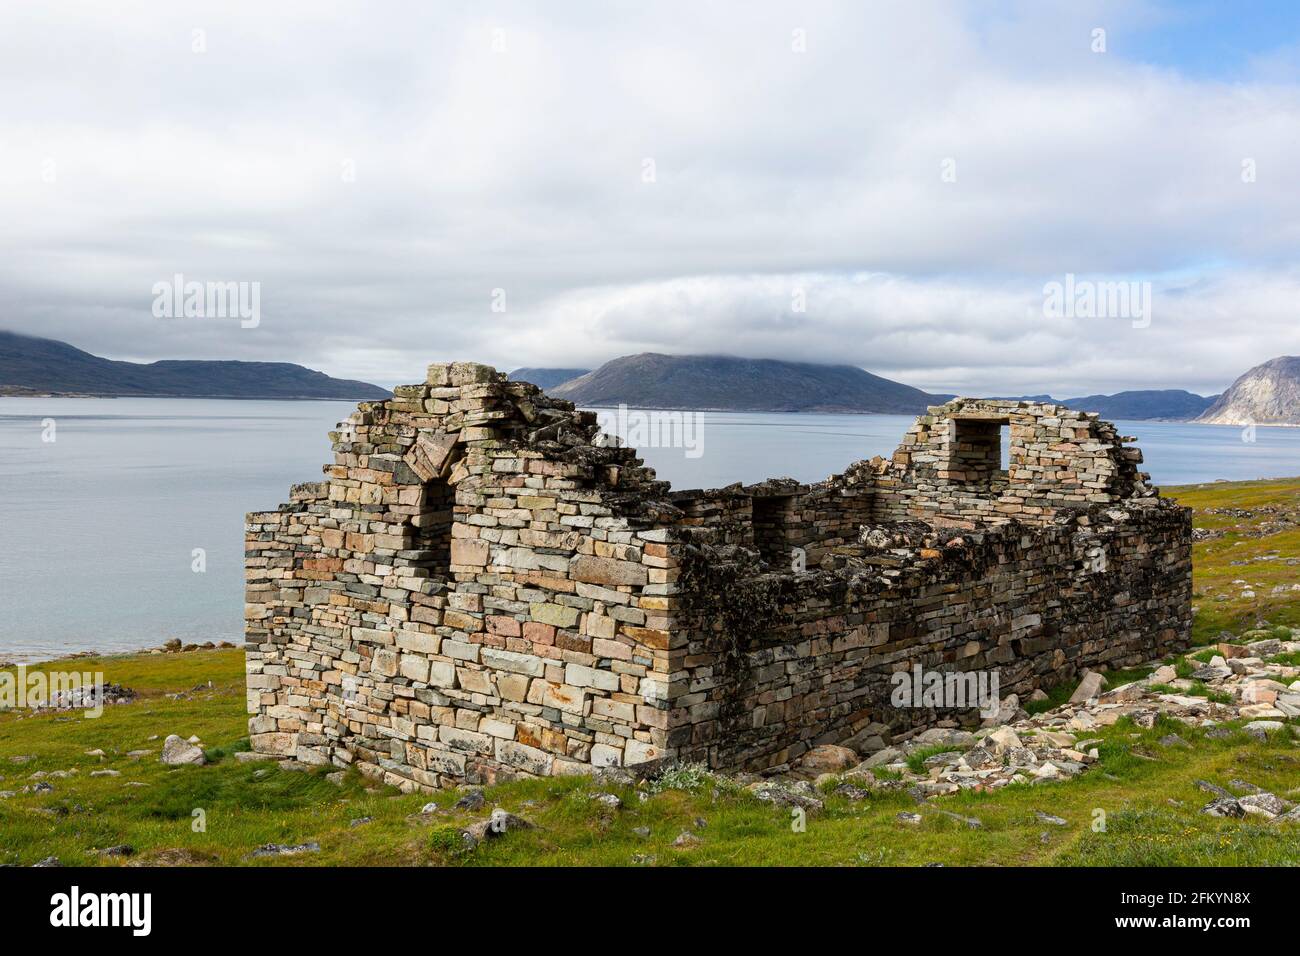 Church at Greenland's largest, best-preserved Norse farmstead ruins at Hvalsey, Qaqortukulooq, Greenland. Stock Photo